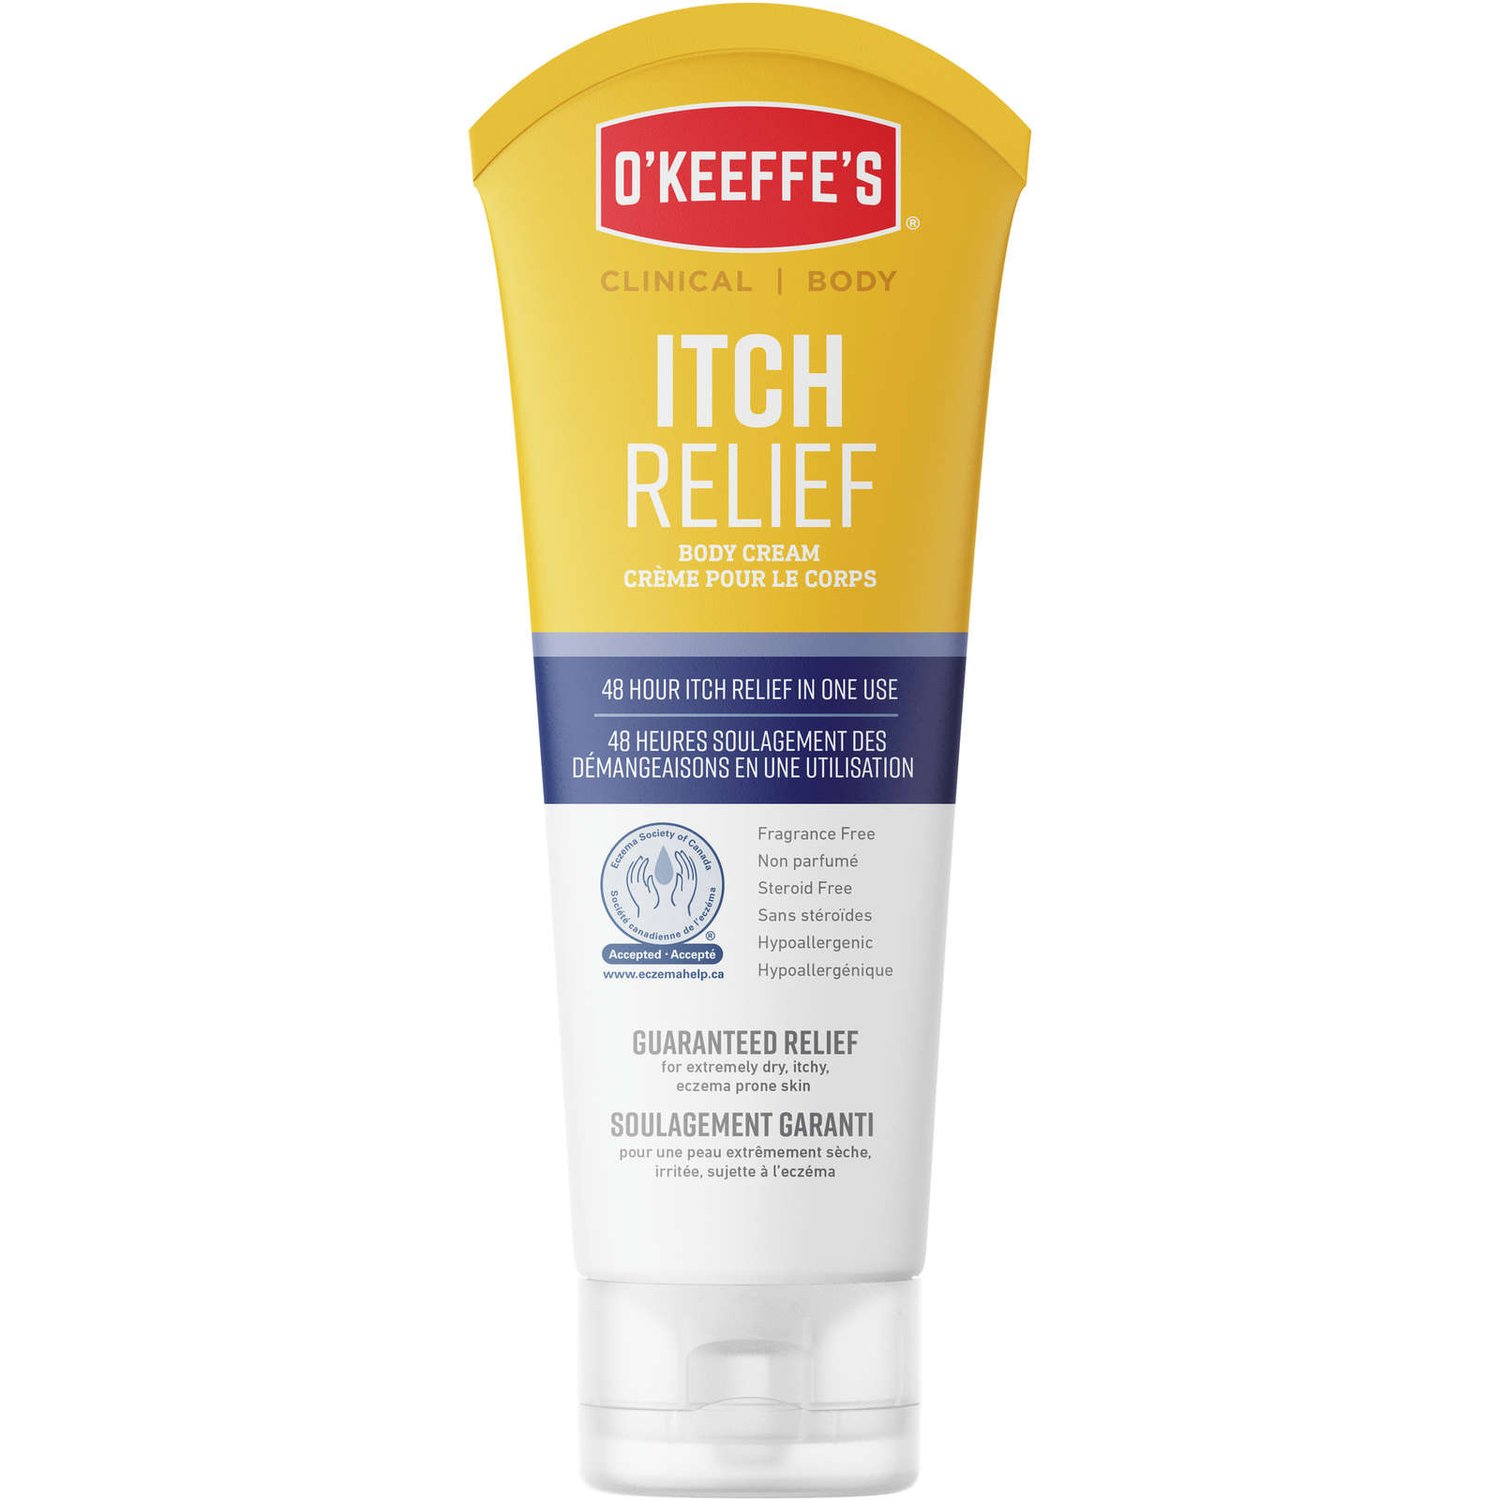 O'Keeffe's Itch Relief BODY CREAM | EMPORIO CONNECTION